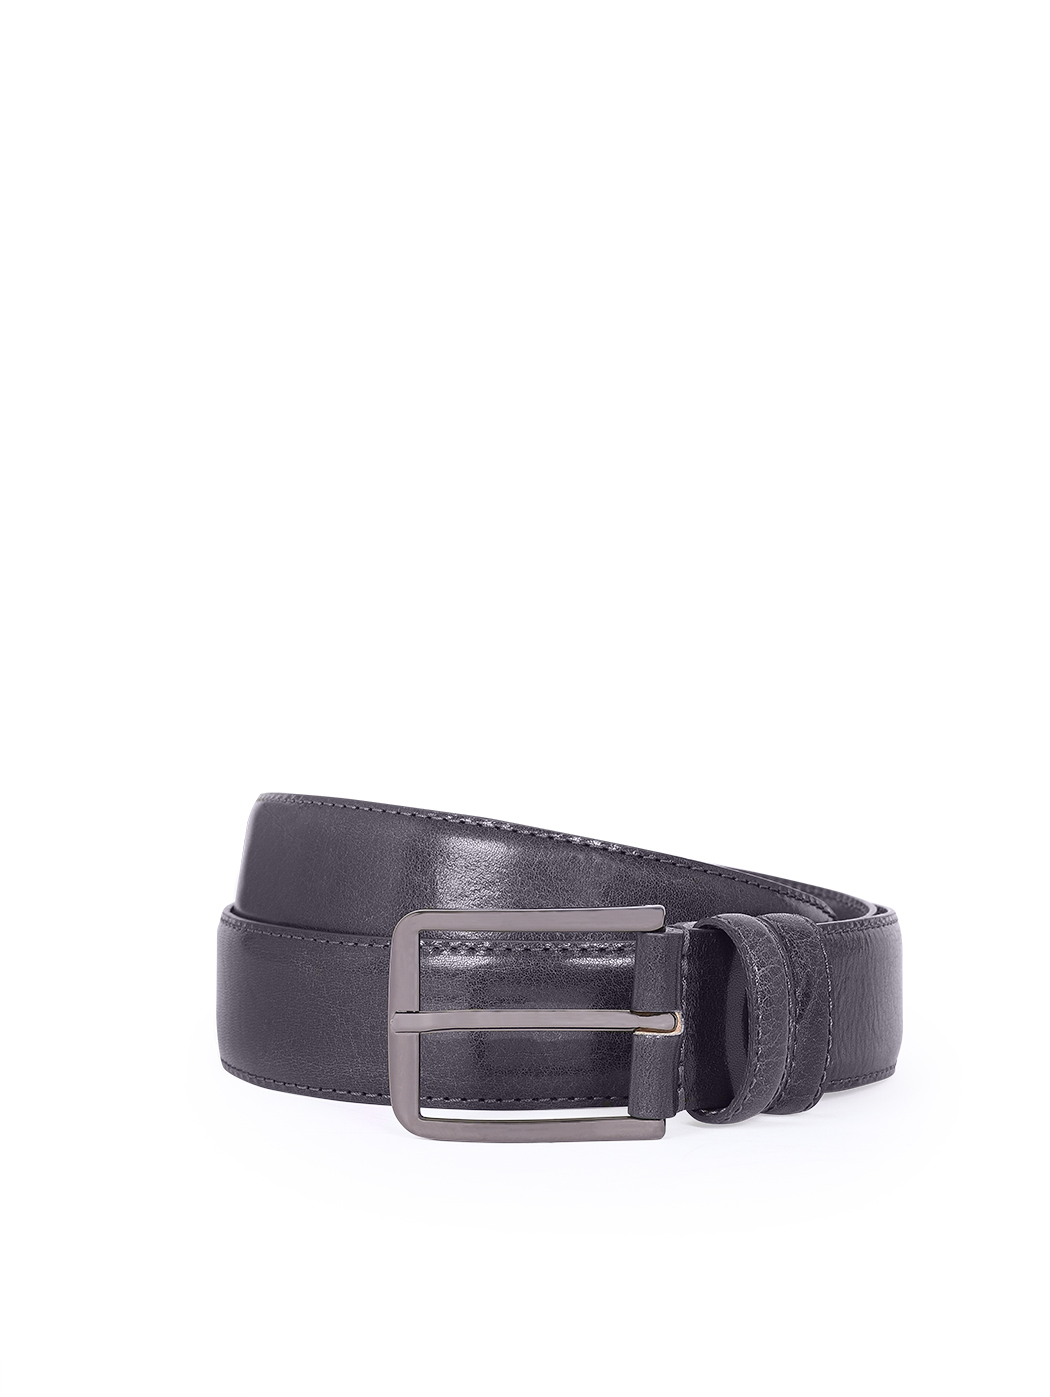 Perforated Black Suede Belt  Handcrafted Elegance Made in Italy